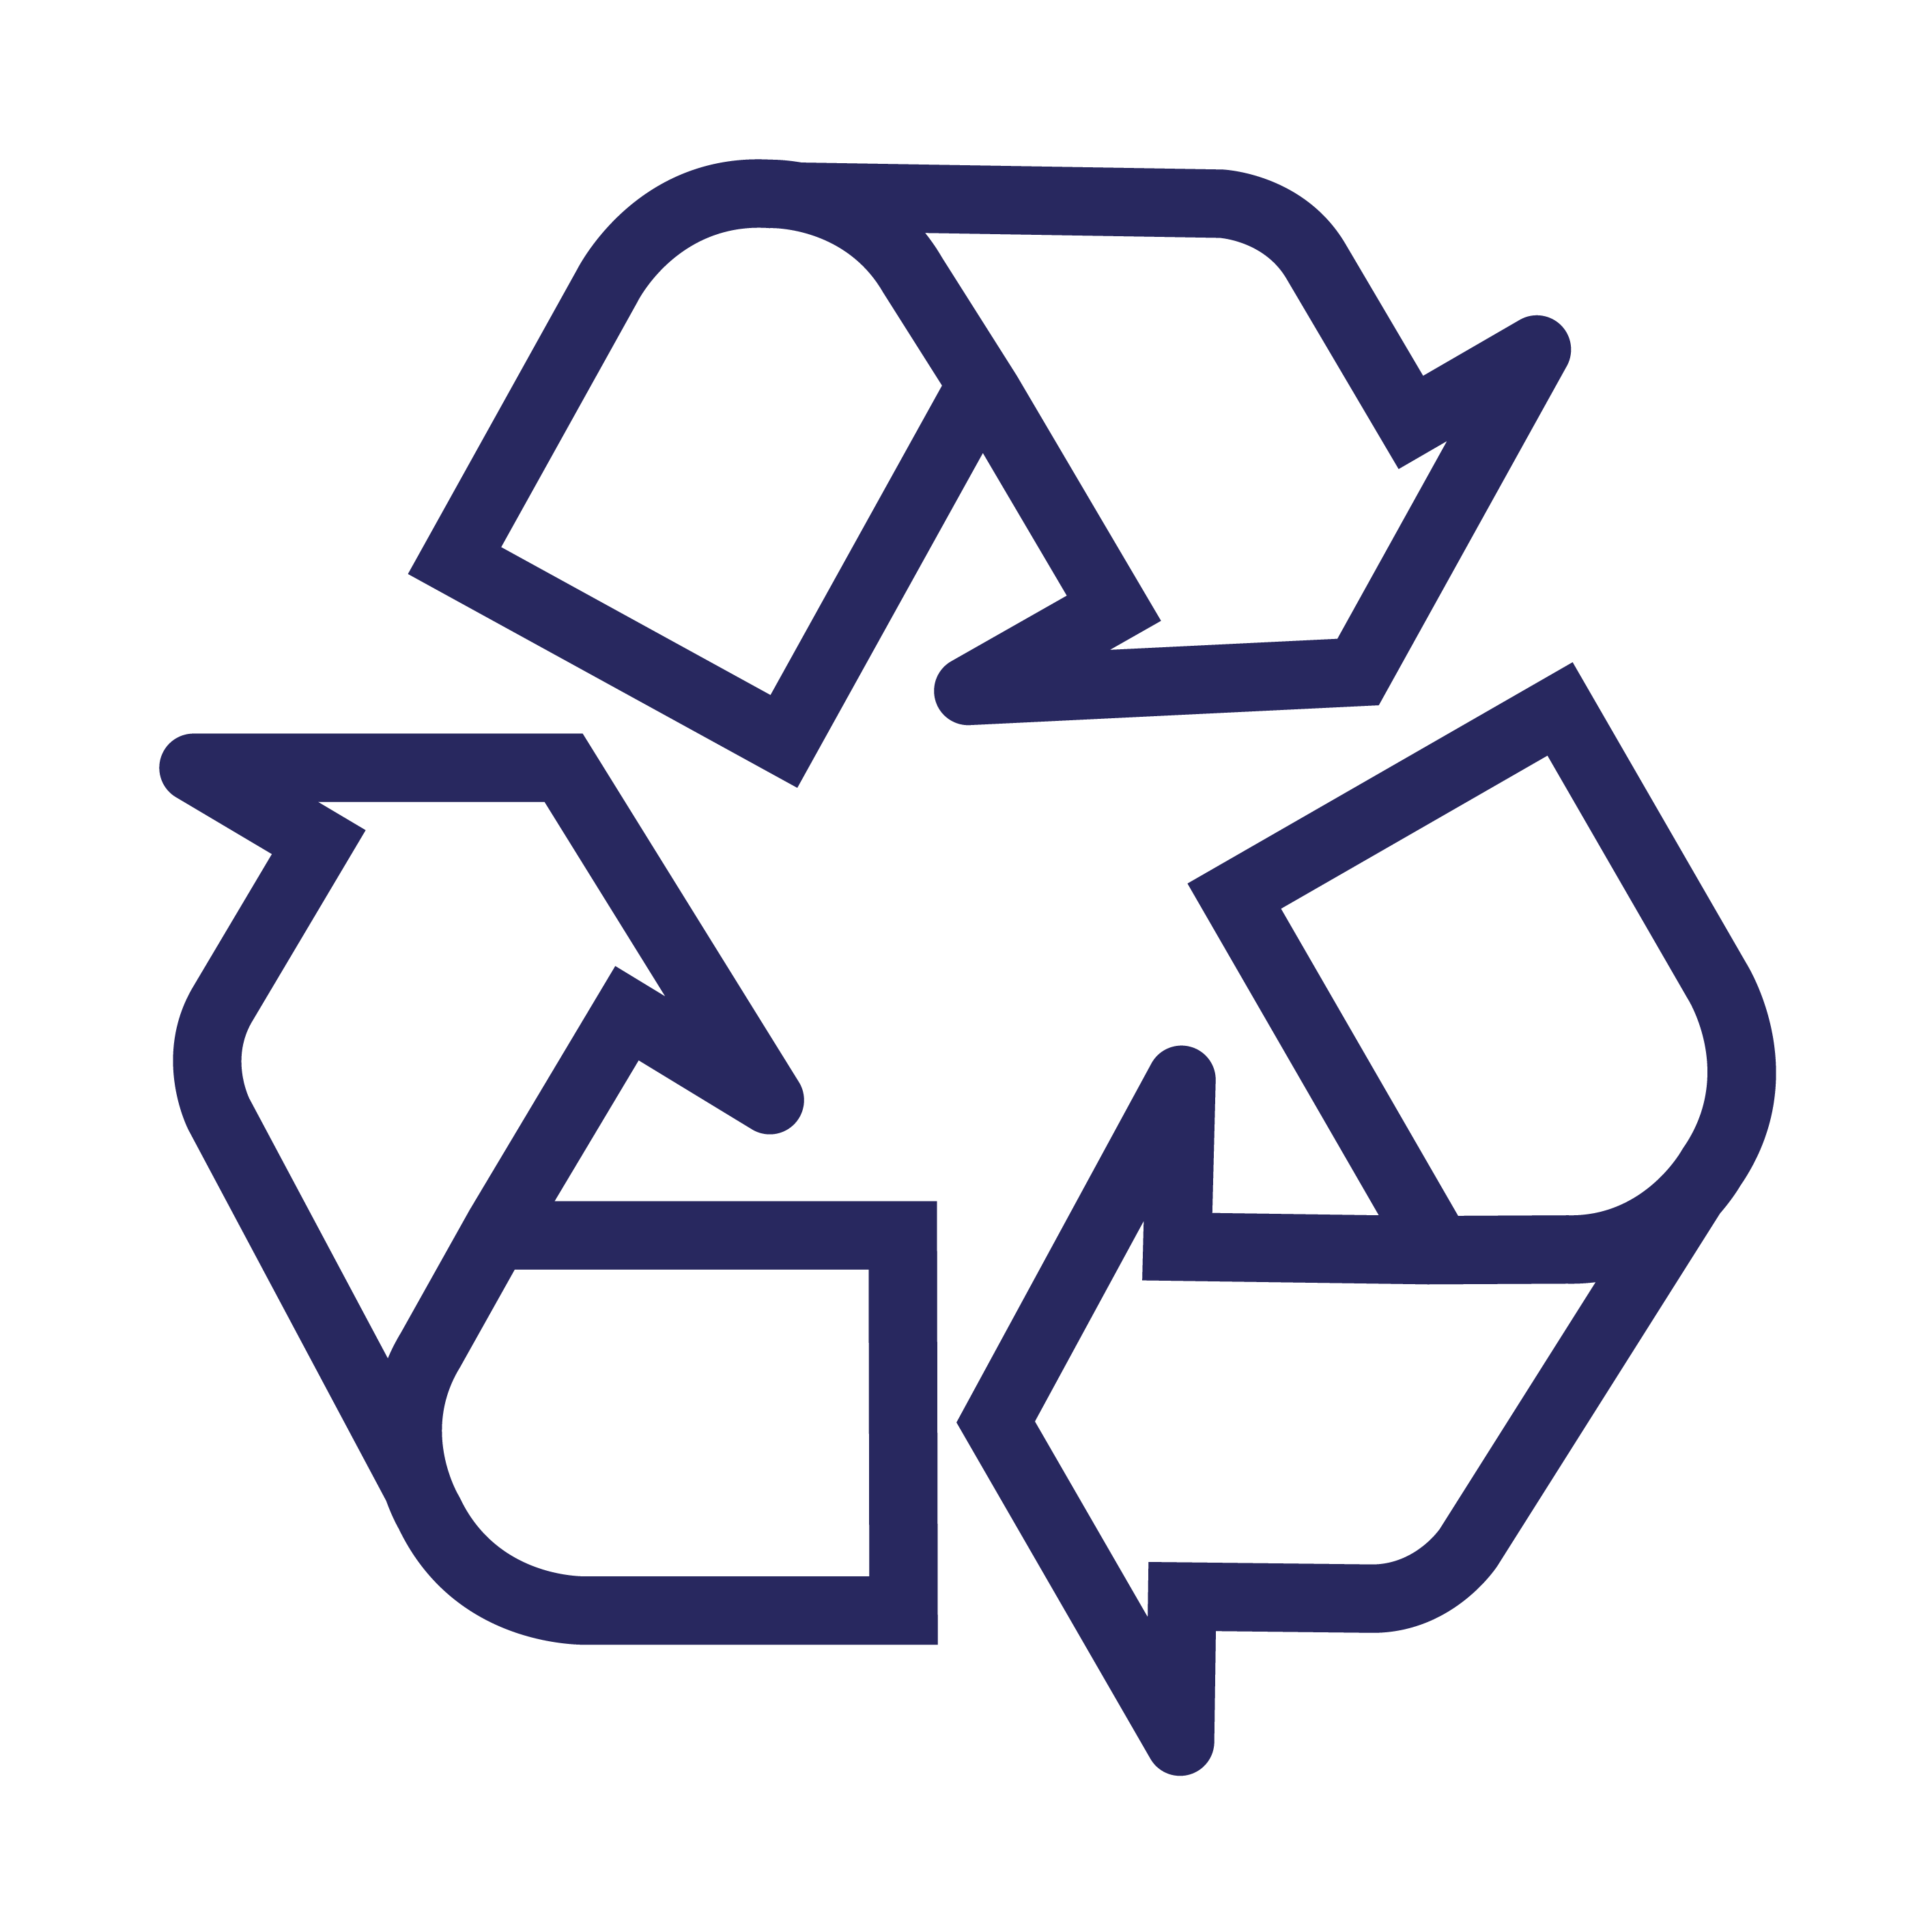 recycling-icon.png